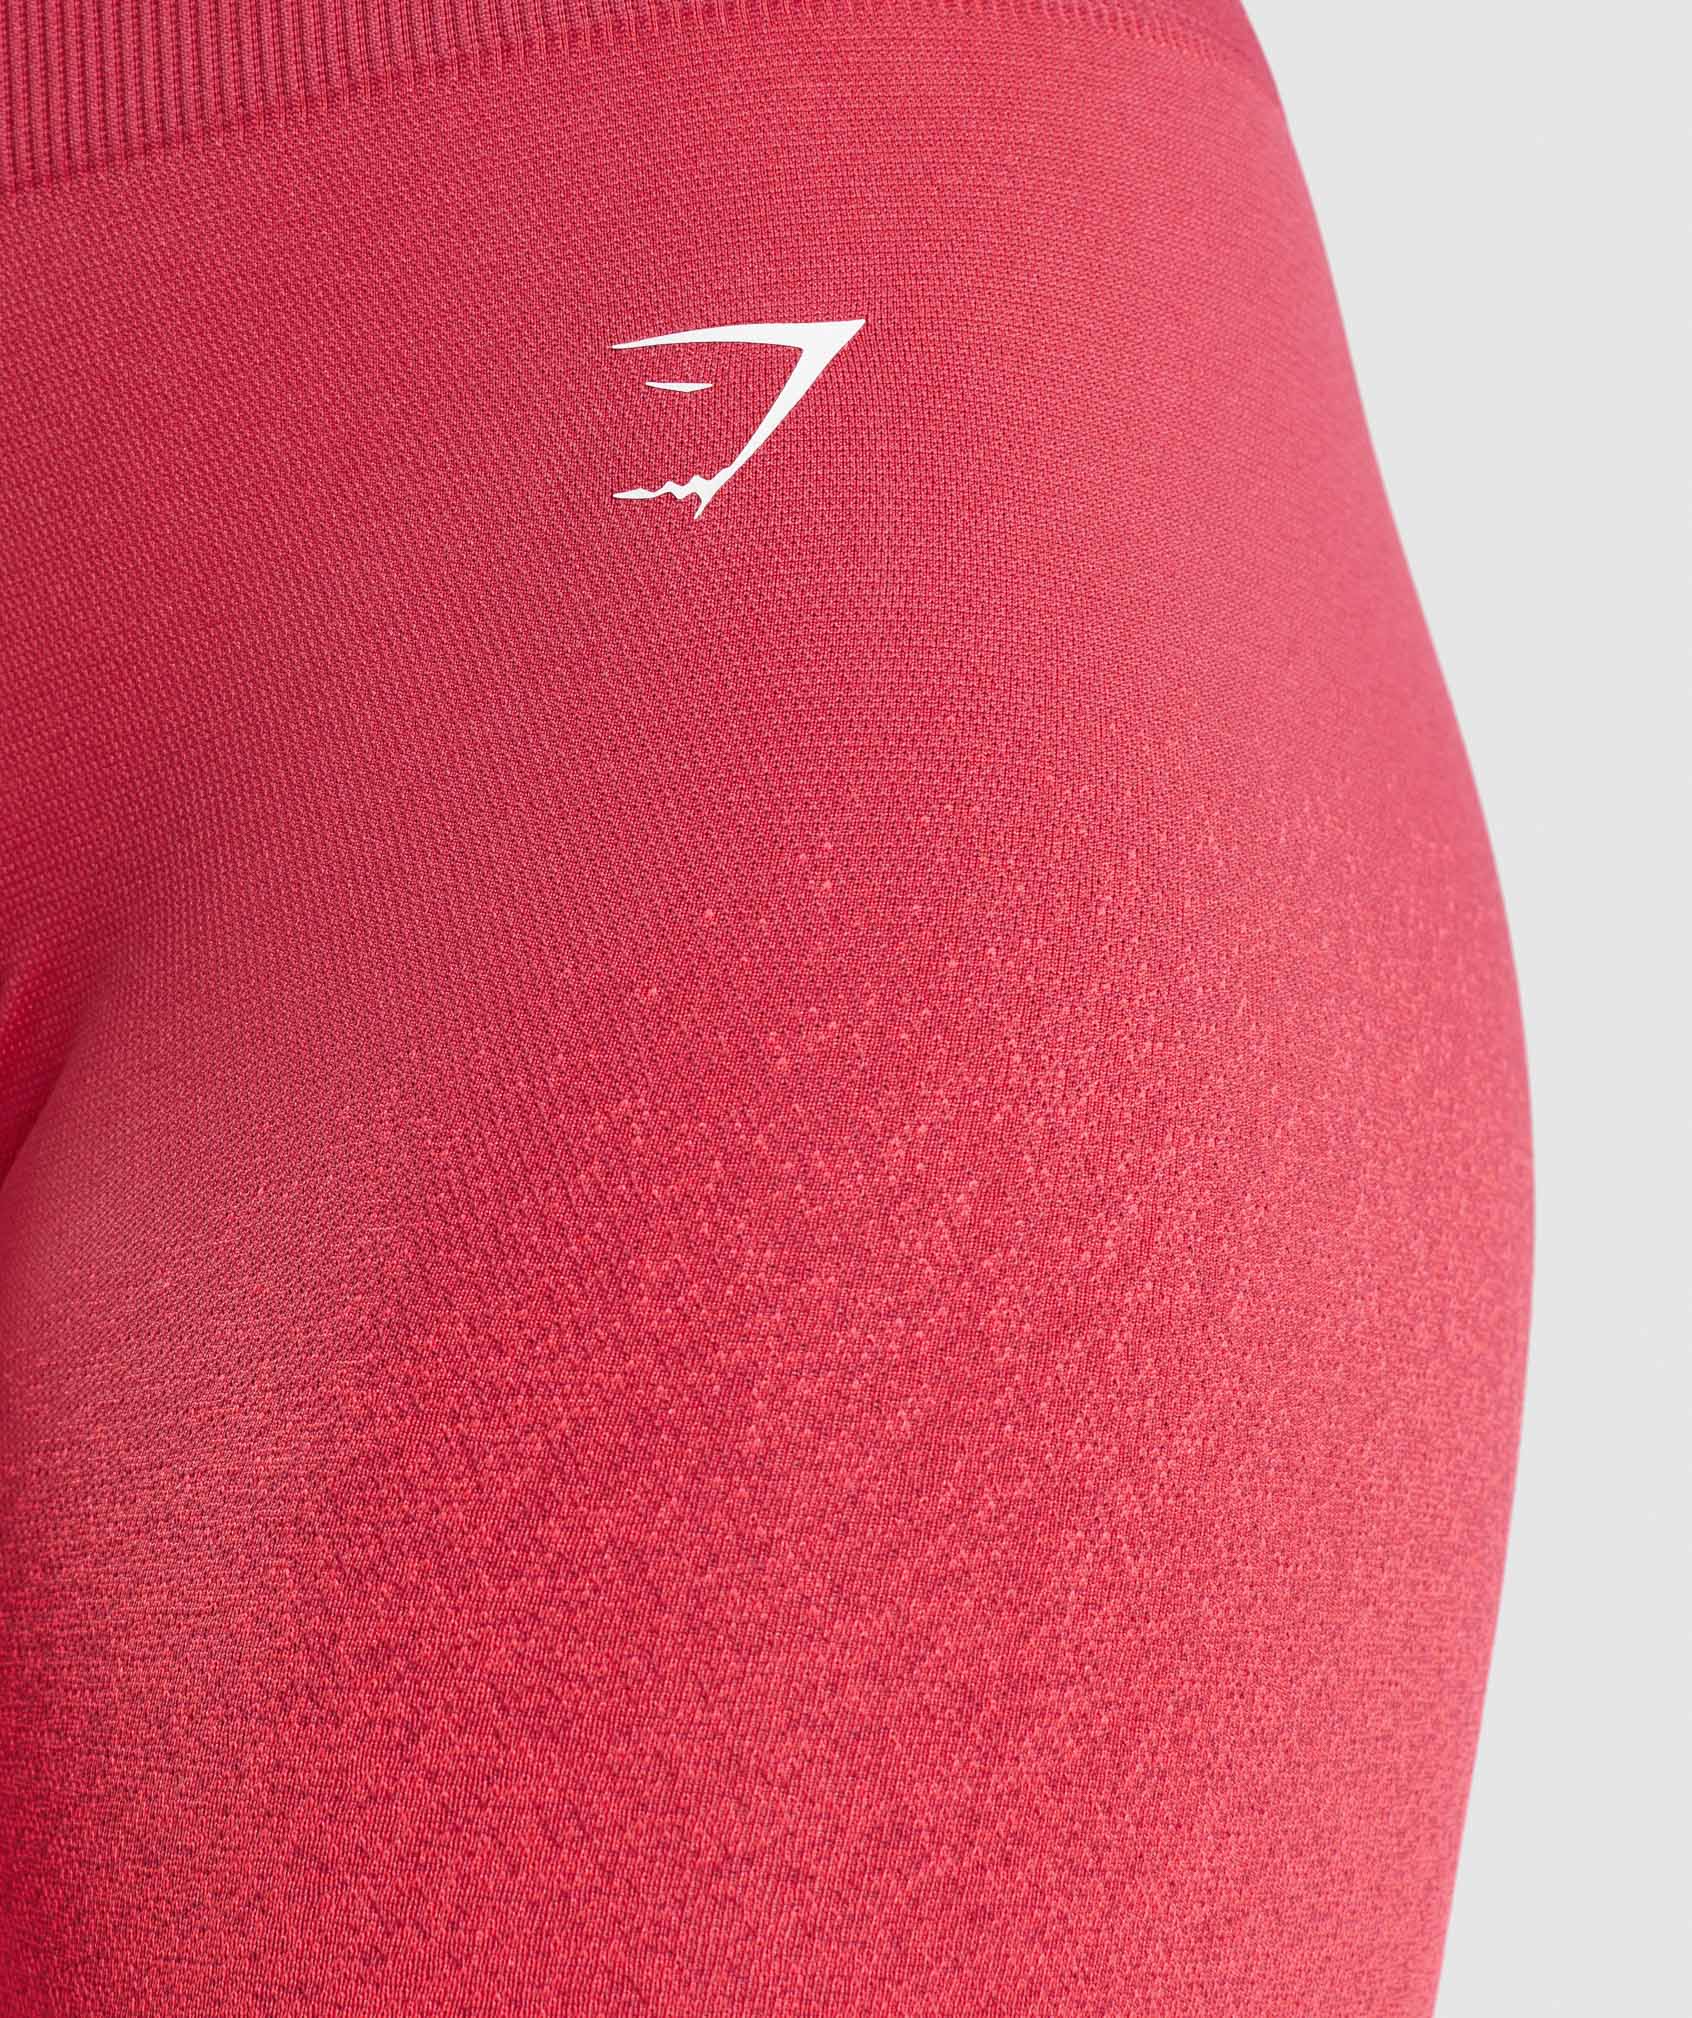 Adapt Ombre Seamless Cycling Shorts in Pink/Red